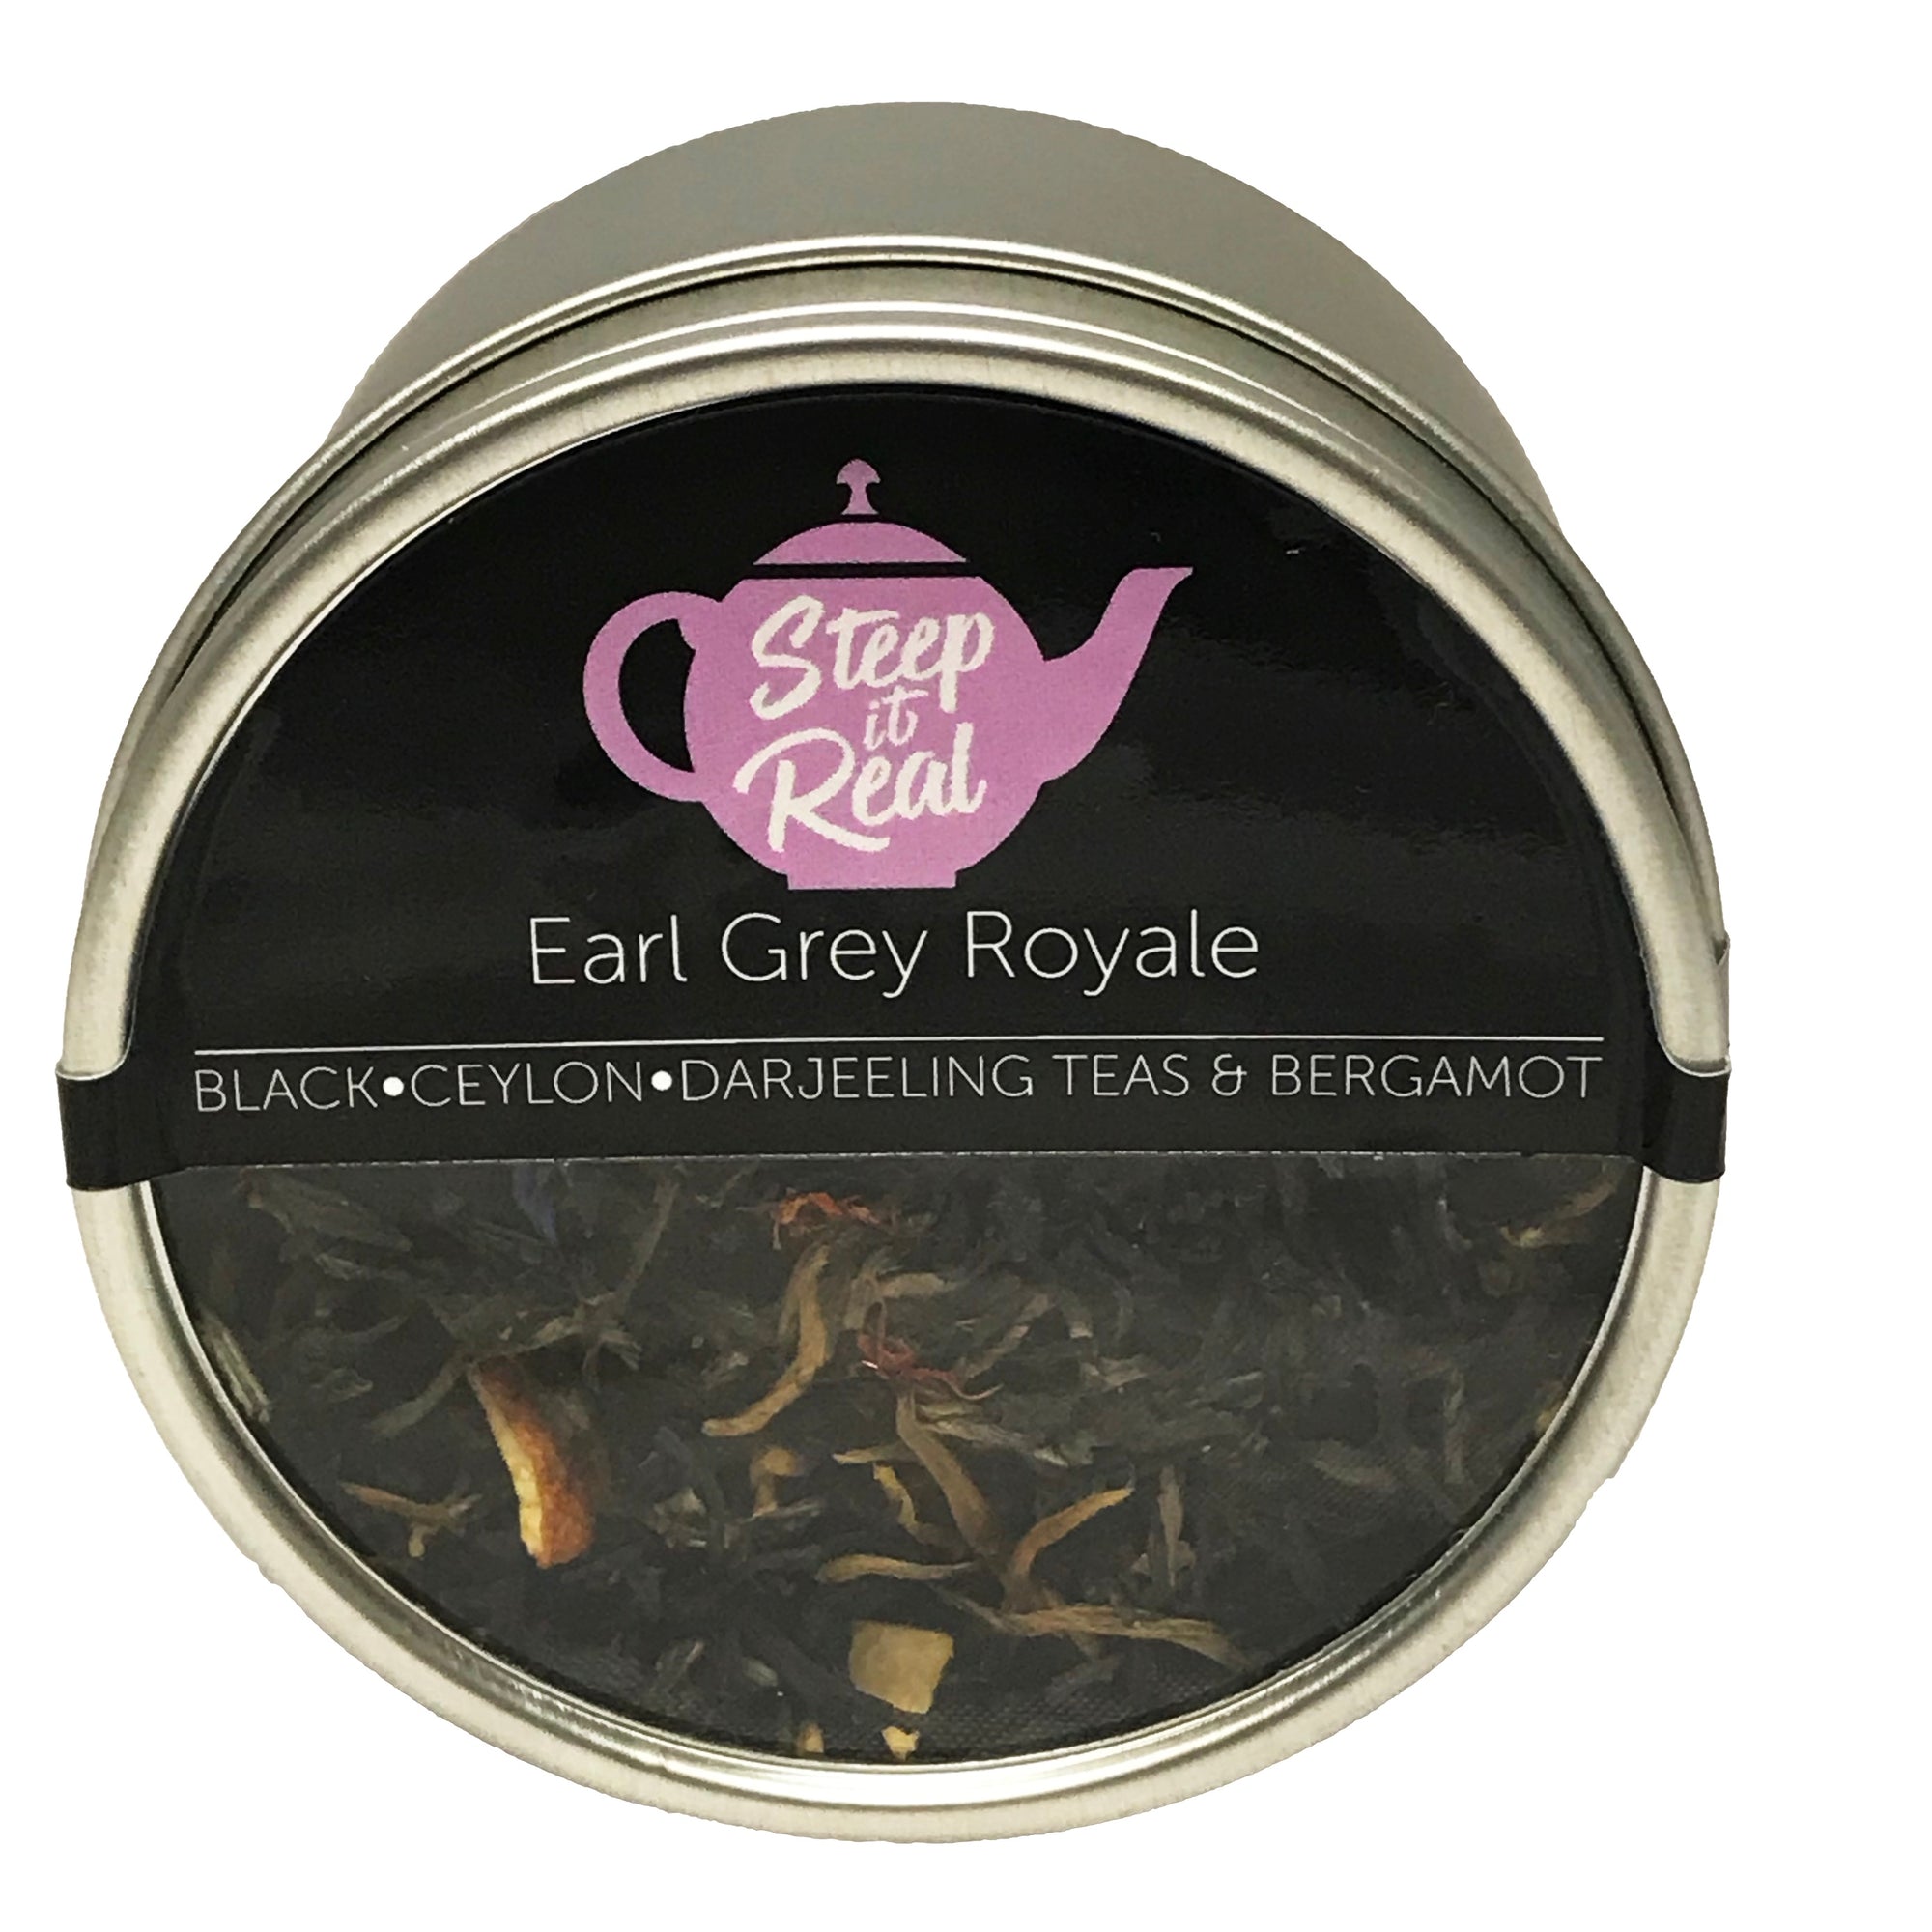 Earl Grey Royale - I Have a Bean